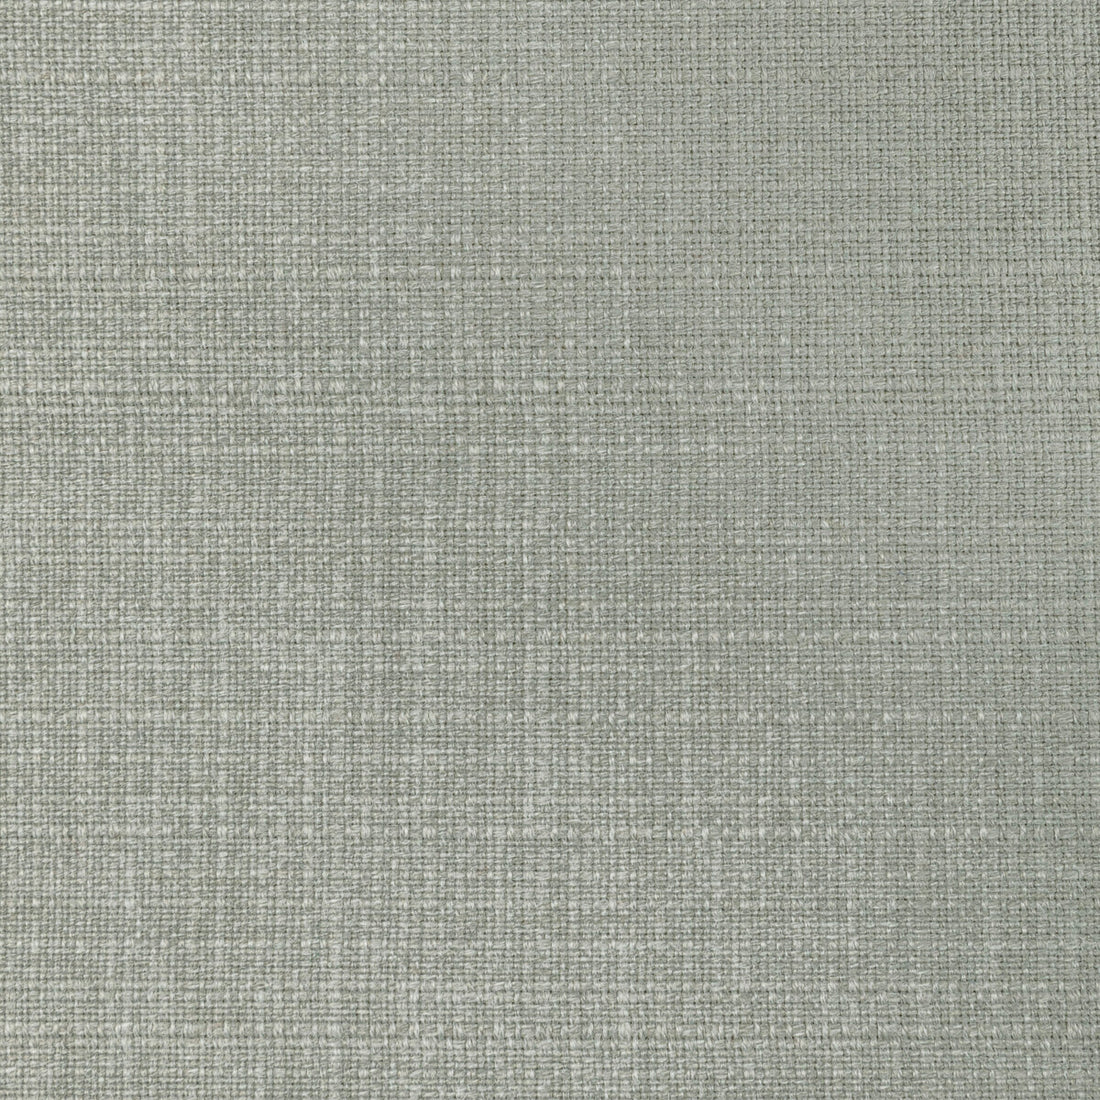 Kravet Basics fabric in 36821-11 color - pattern 36821.11.0 - by Kravet Basics in the Indoor / Outdoor collection